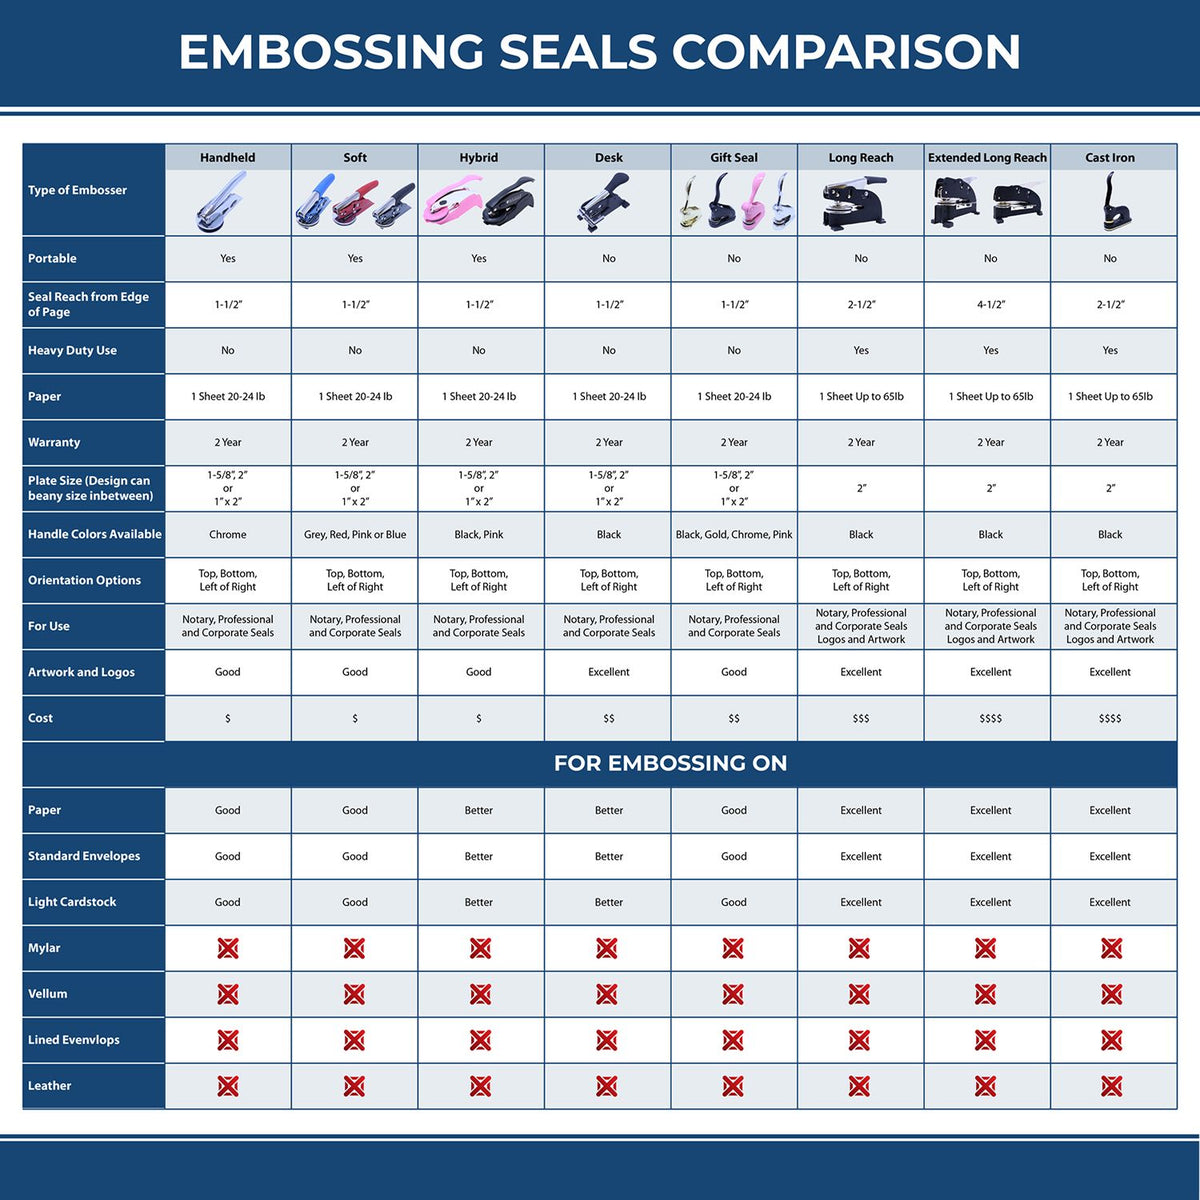 A comparison chart for the different types of mount models available for the Hybrid Wyoming Geologist Seal